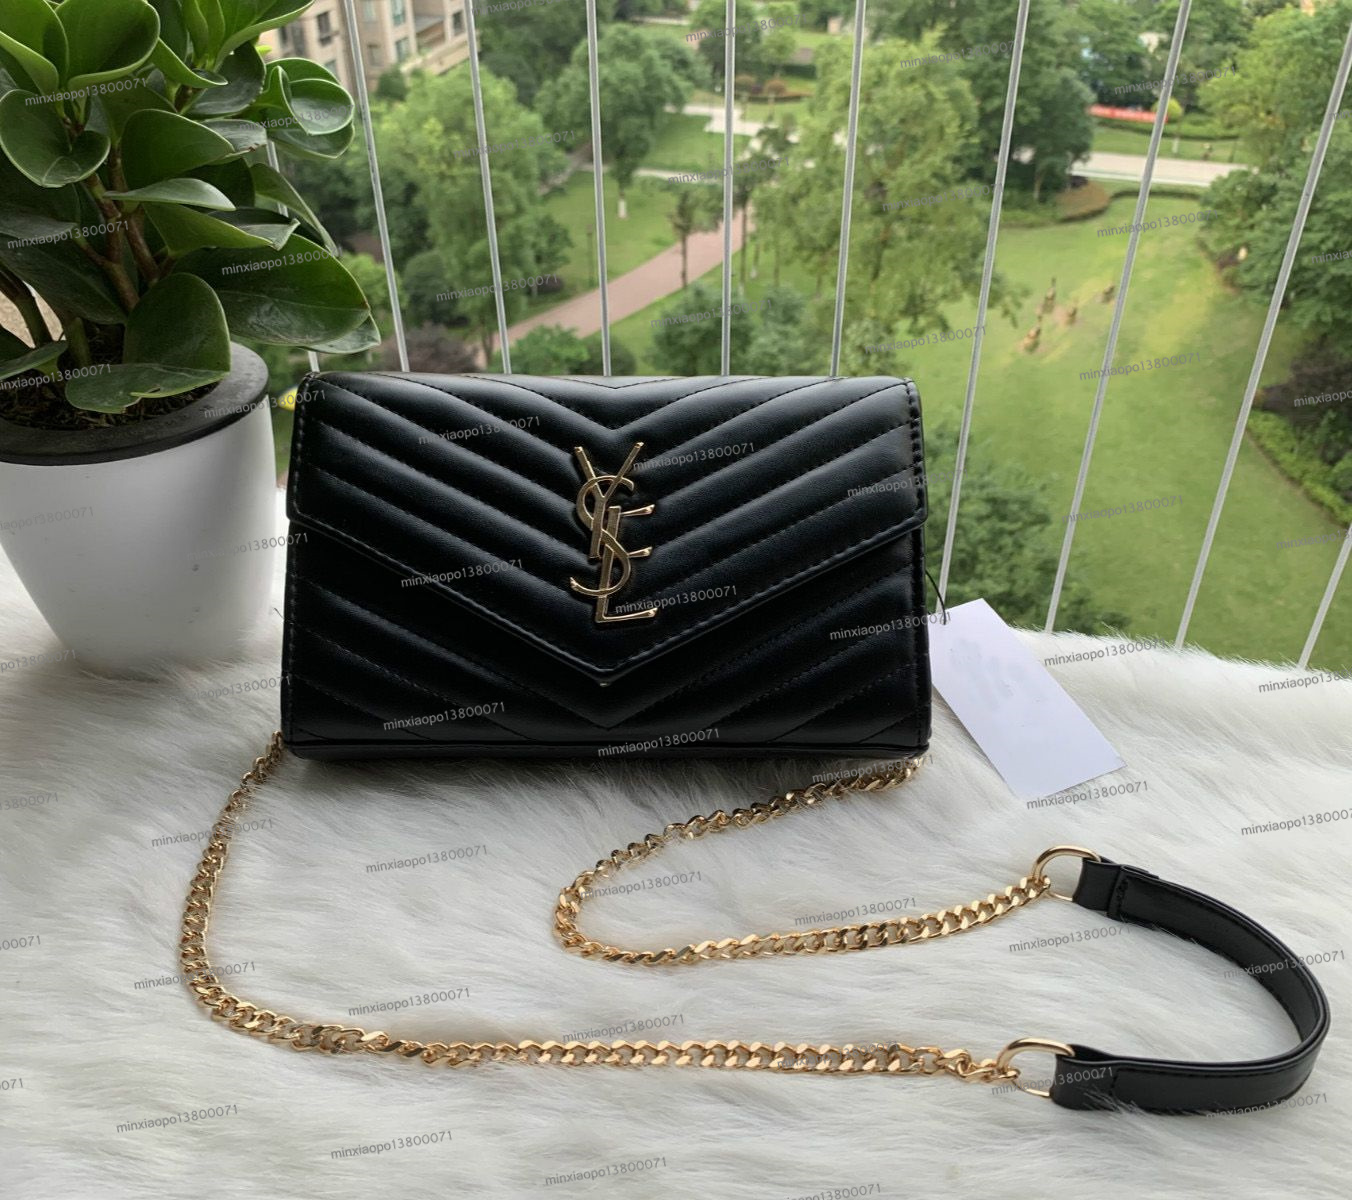 

Top Quality Leather Chain Purse Leather women Luxury Fashion YSLitys Gold Sliver Chain Bag Women Handbag Shoulder Purse louise Purse vutton Crossbody viuton Bag, Freight/price difference